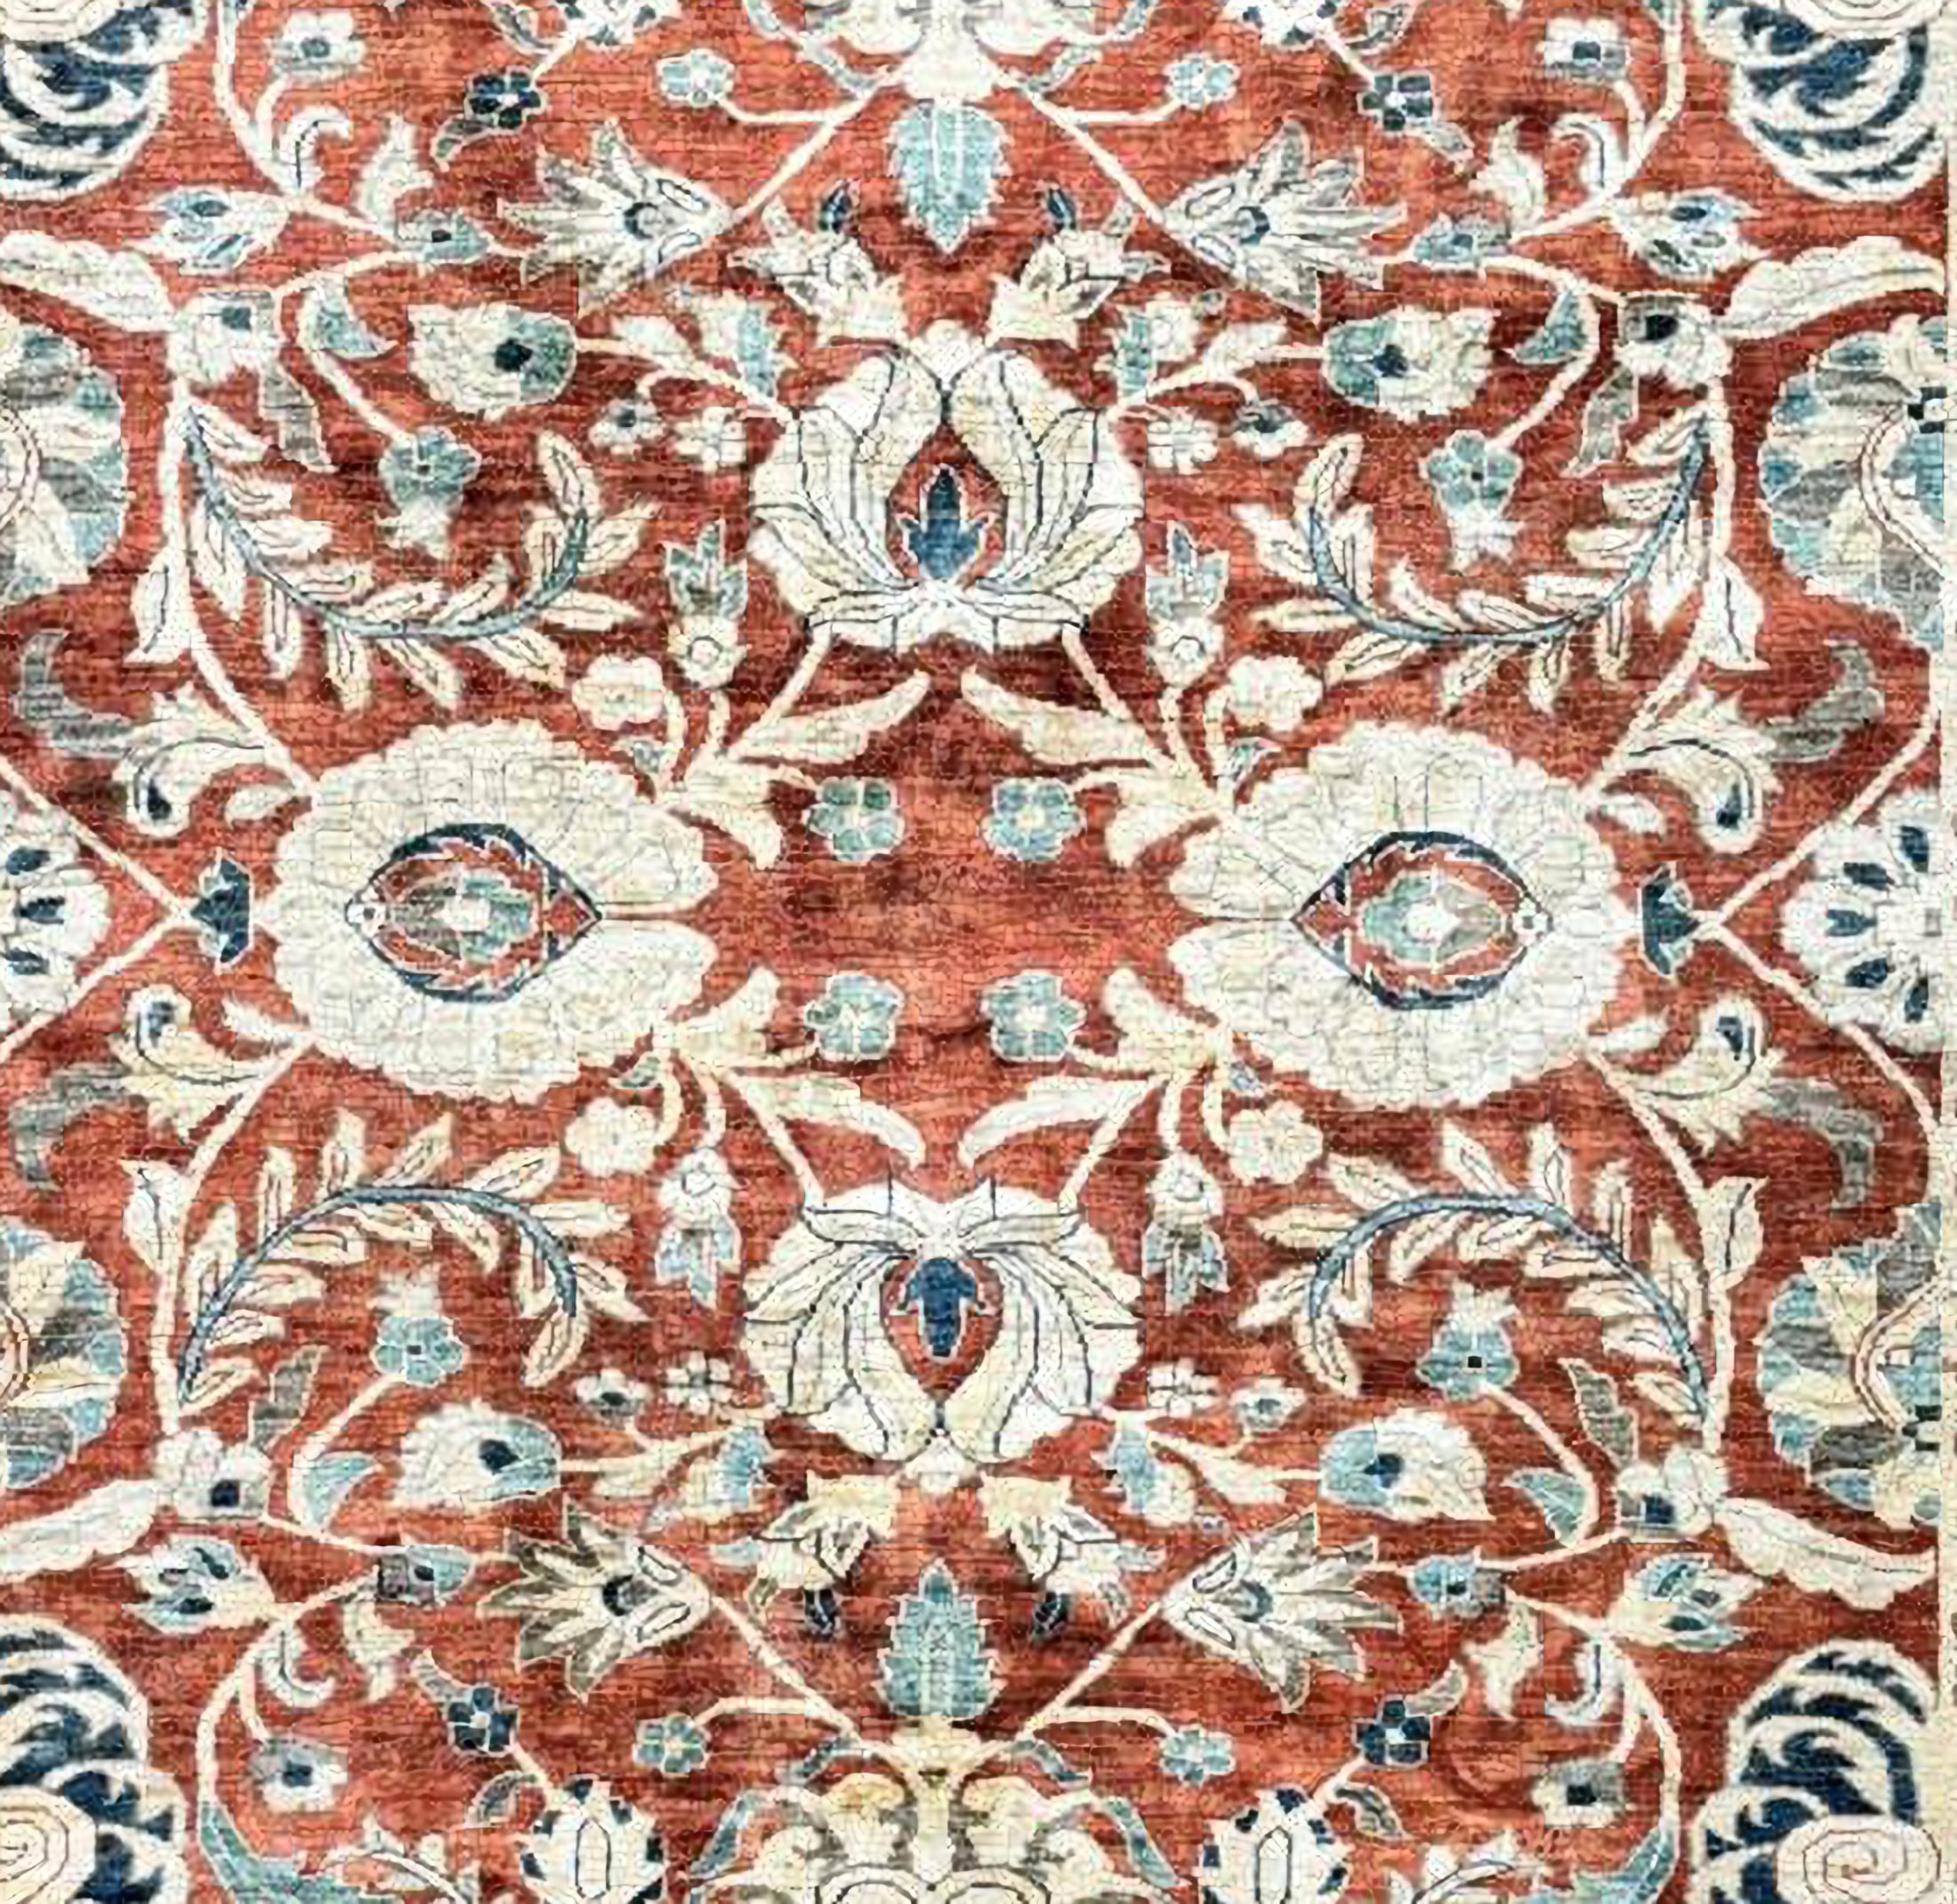 Amazing Ziegler Wool Rug began 20th Century
Very good condition
Measurements: 365 x 274 cm

Ziegler rugs are inspired by the design of classic Persian rugs to give every interior an antique touch. Unlike other oriental rugs, the Ziegler rug is not